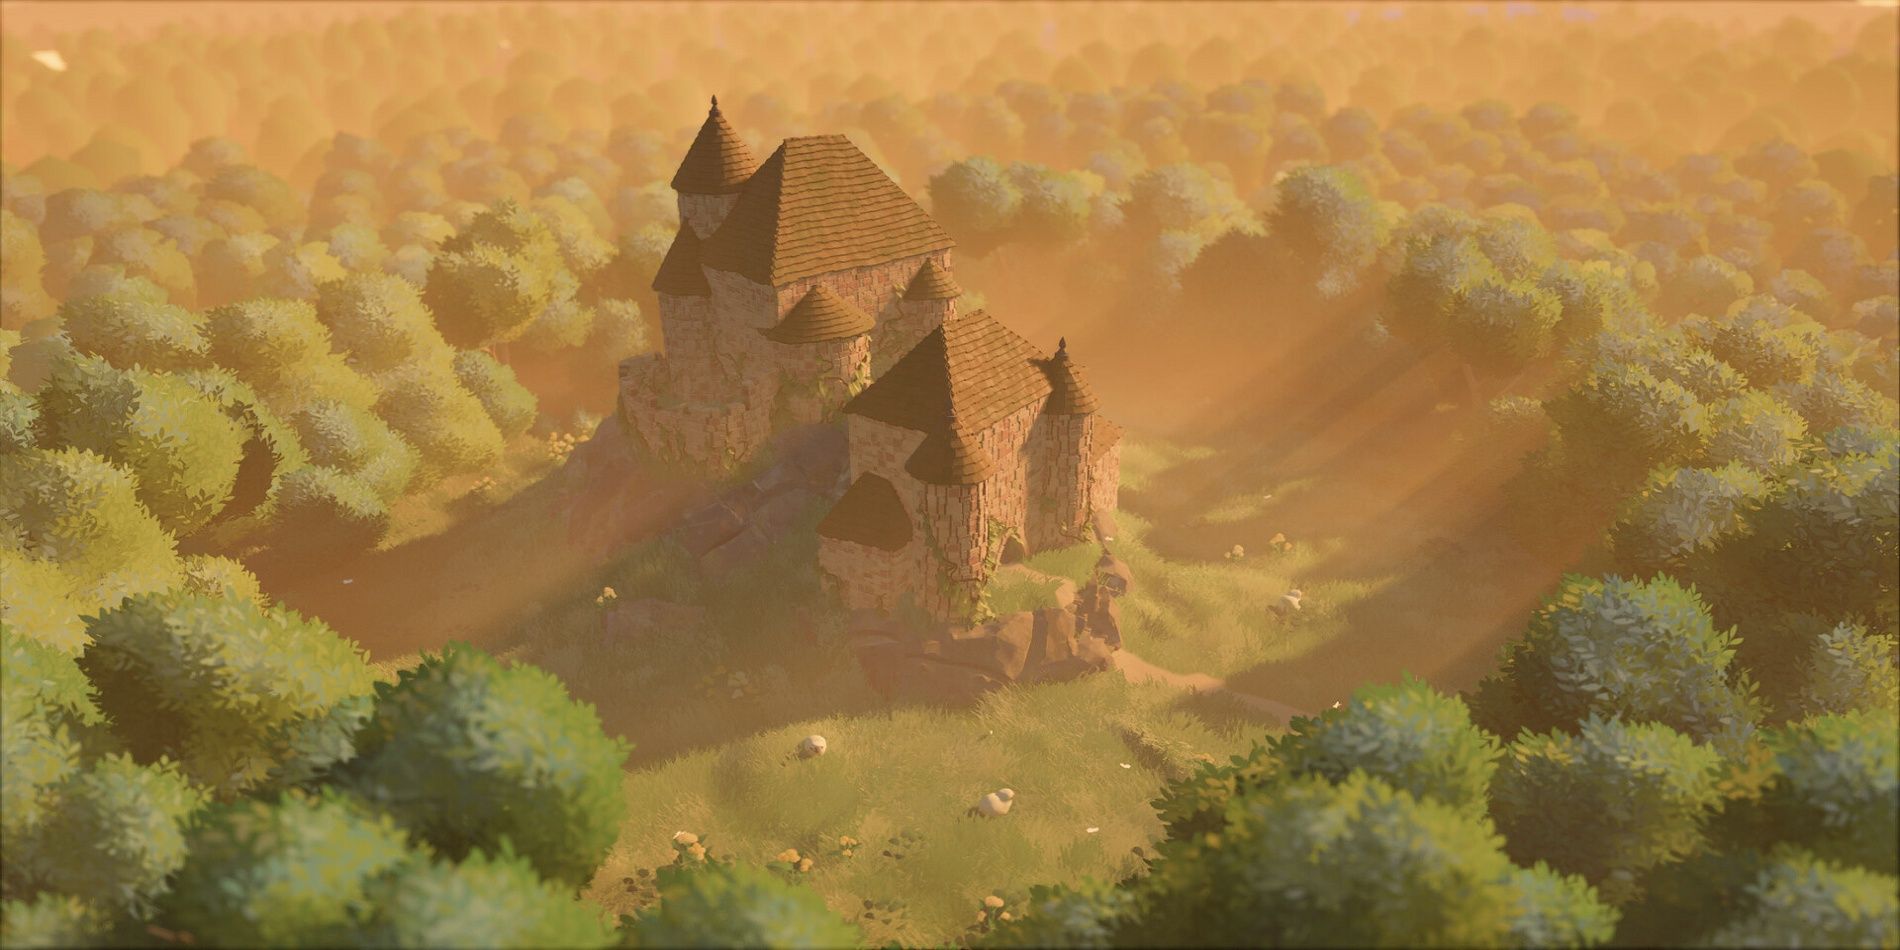 A picturesque dawn breaks over a castle in a forest in Tiny Glade